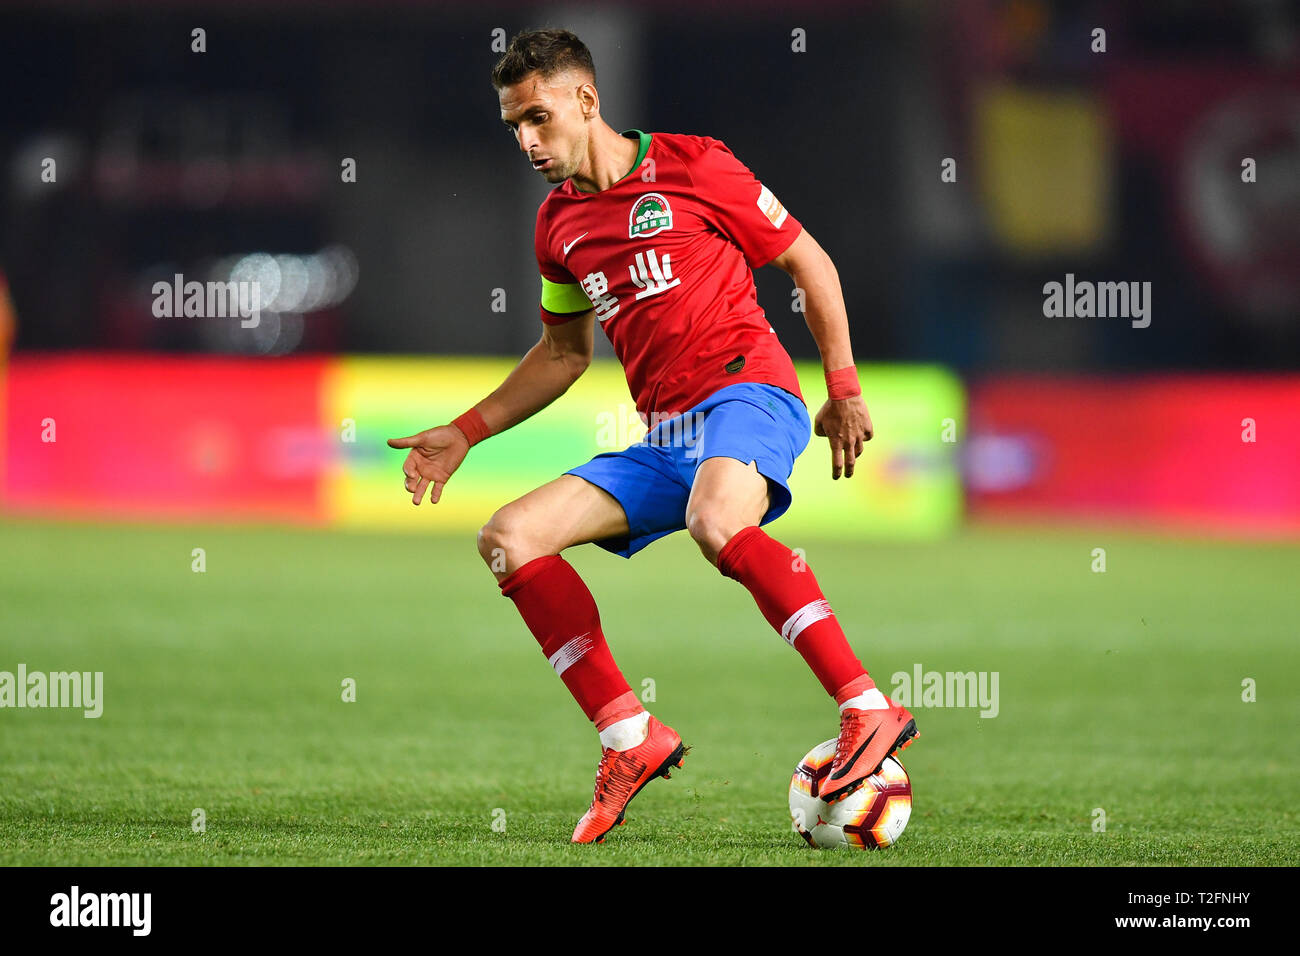 Zhengzhou, China. 31st Mar, 2019. Brazilian football player Olivio da Rosa, also known as Ivo, of Henan Jianye dribbles against Shanghai Greenland Shenhua in their 3rd round match during the 2019 Chinese Football Association Super League (CSL) in Zhengzhou city, central China's Henan province, 31 March 2019. Shanghai Greenland Shenhua defeated Henan Jianye 2-1. Credit: Matt Buxton/Alamy Live News Stock Photo